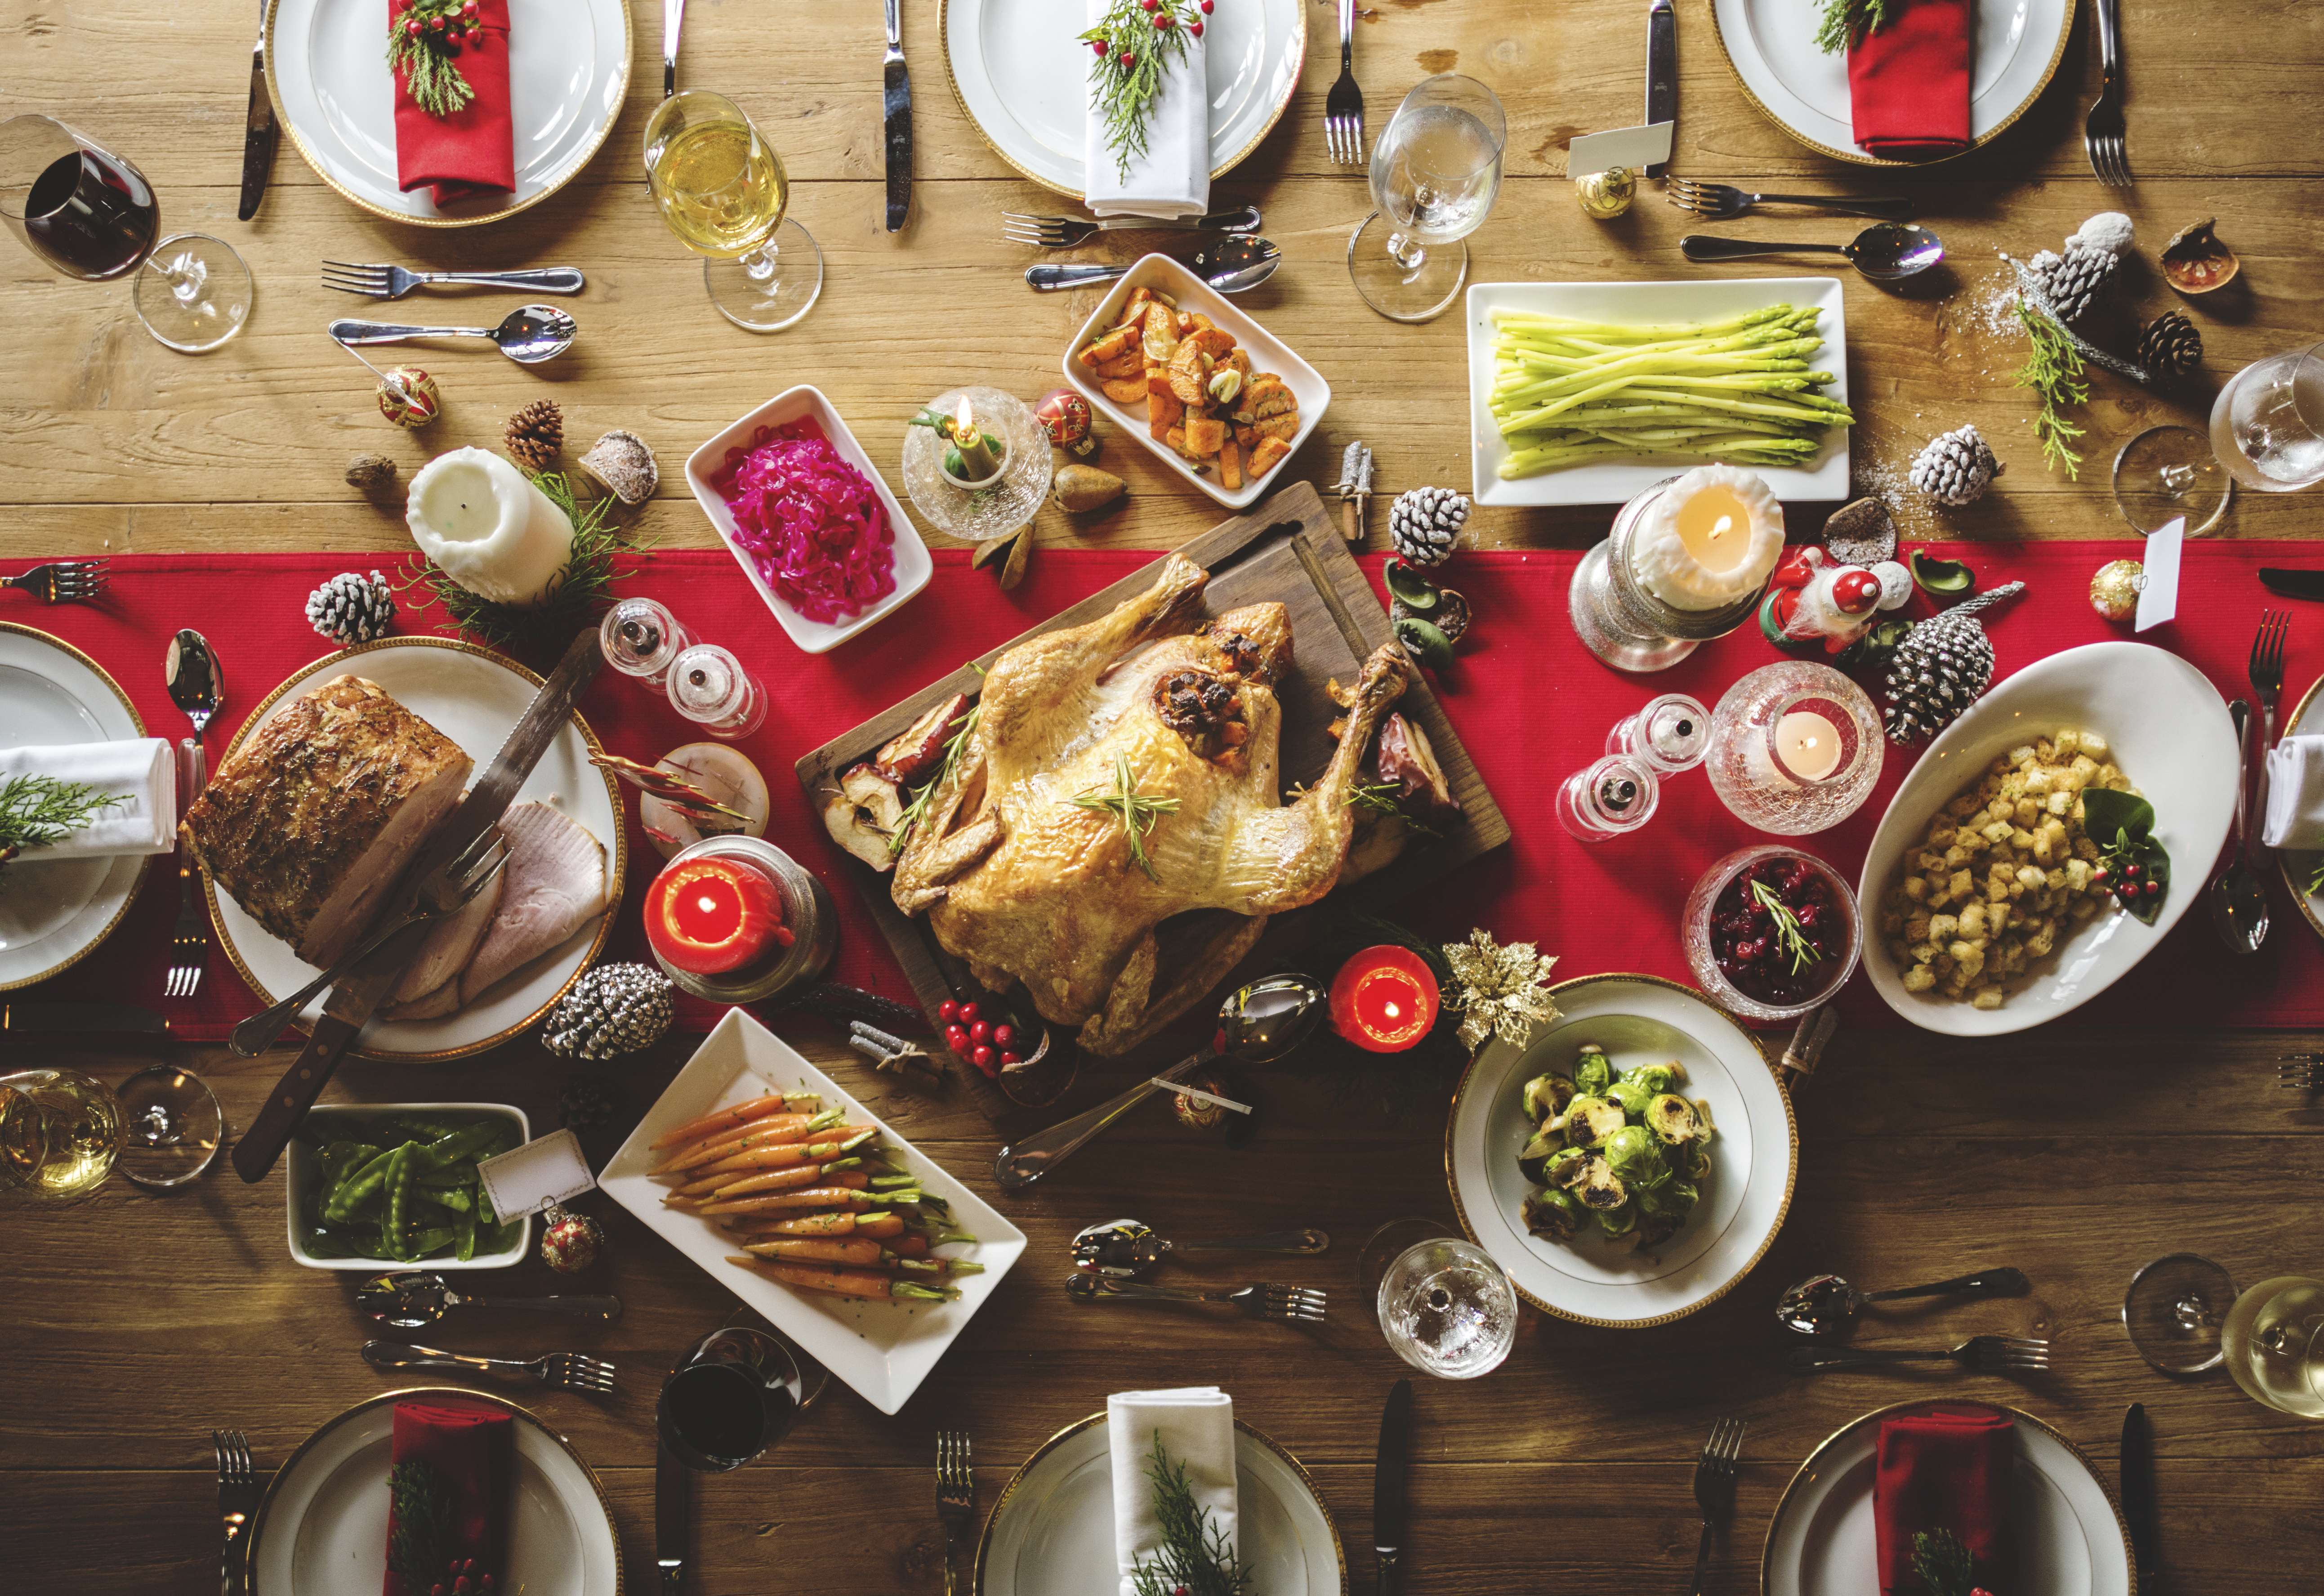 Overindulging at Christmas is one cause of the spike in heart attacks over the holidays.